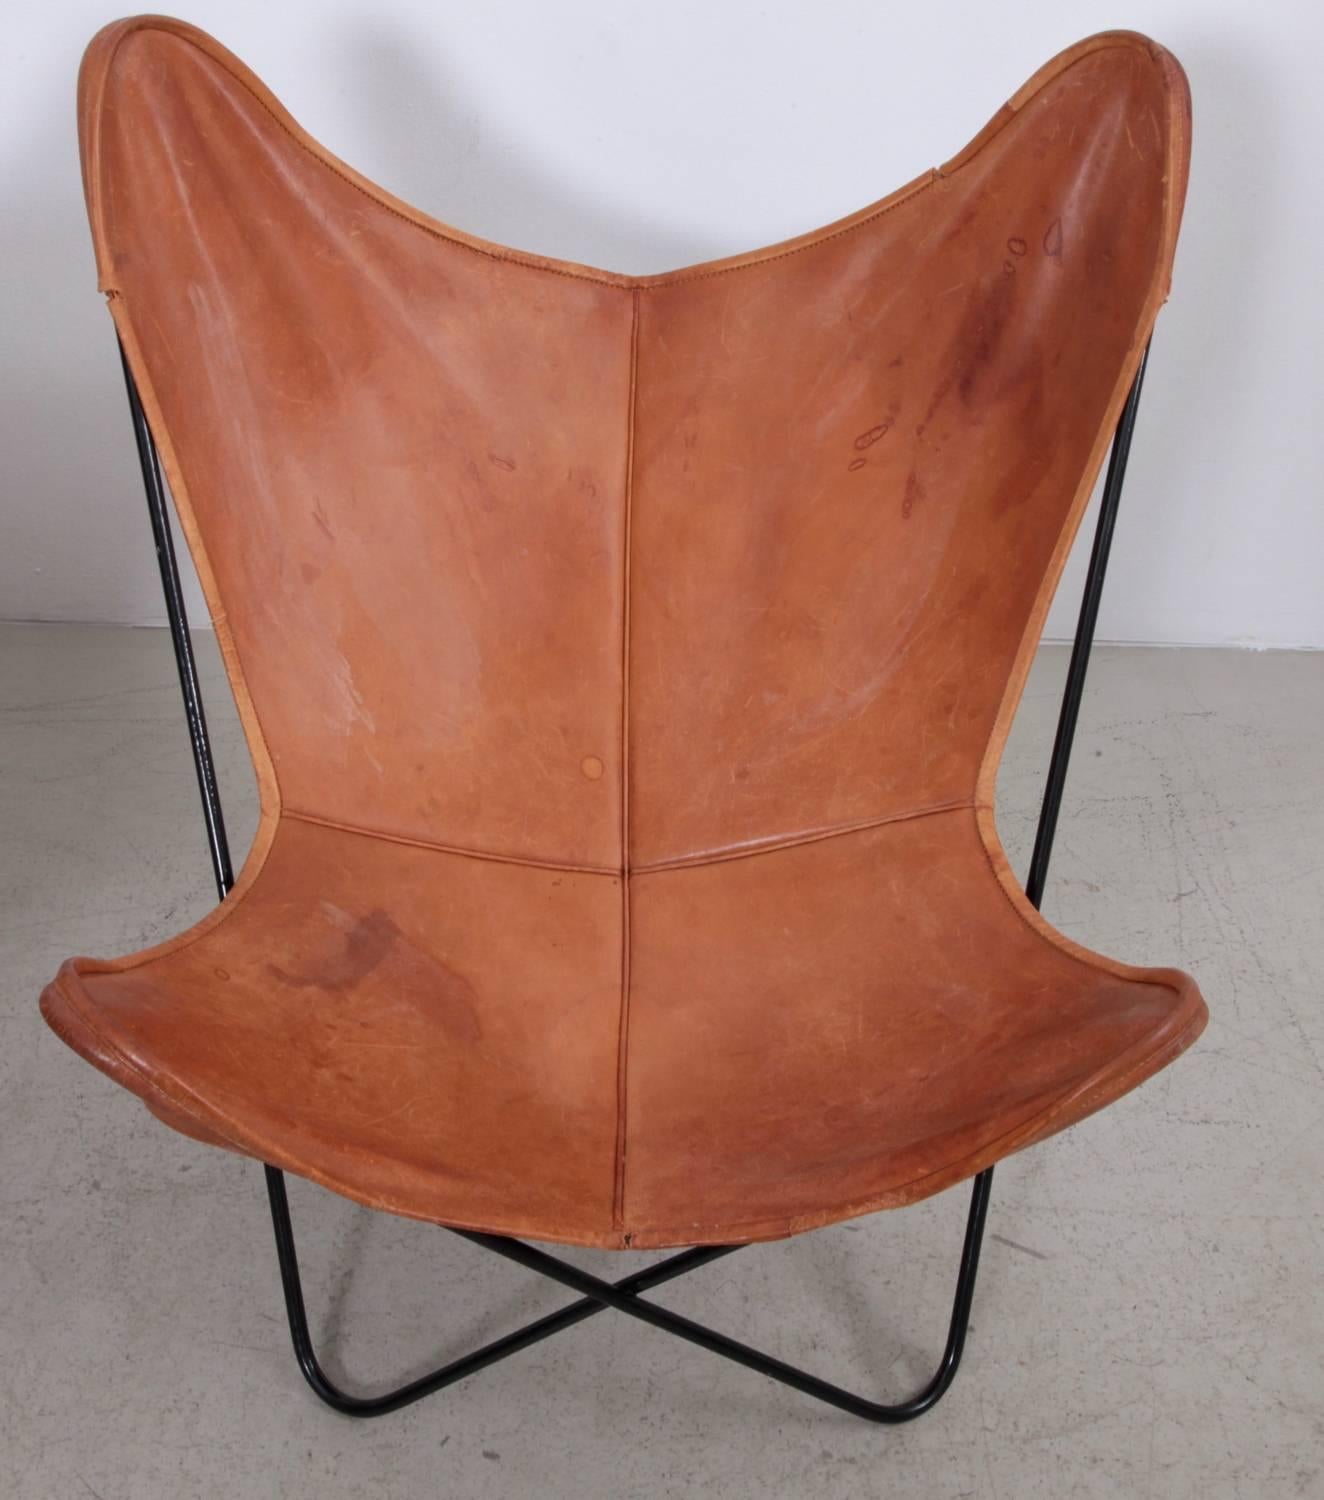 Butterfly chair pair by Knoll International with exceptionally beautiful original leather in cognac on a black base. Designed by J. Ferrari-Hardoy, J. Kurchan, A. Bonet in 1938. Manufactured from 1947-1975 by Knoll International. The chairs have